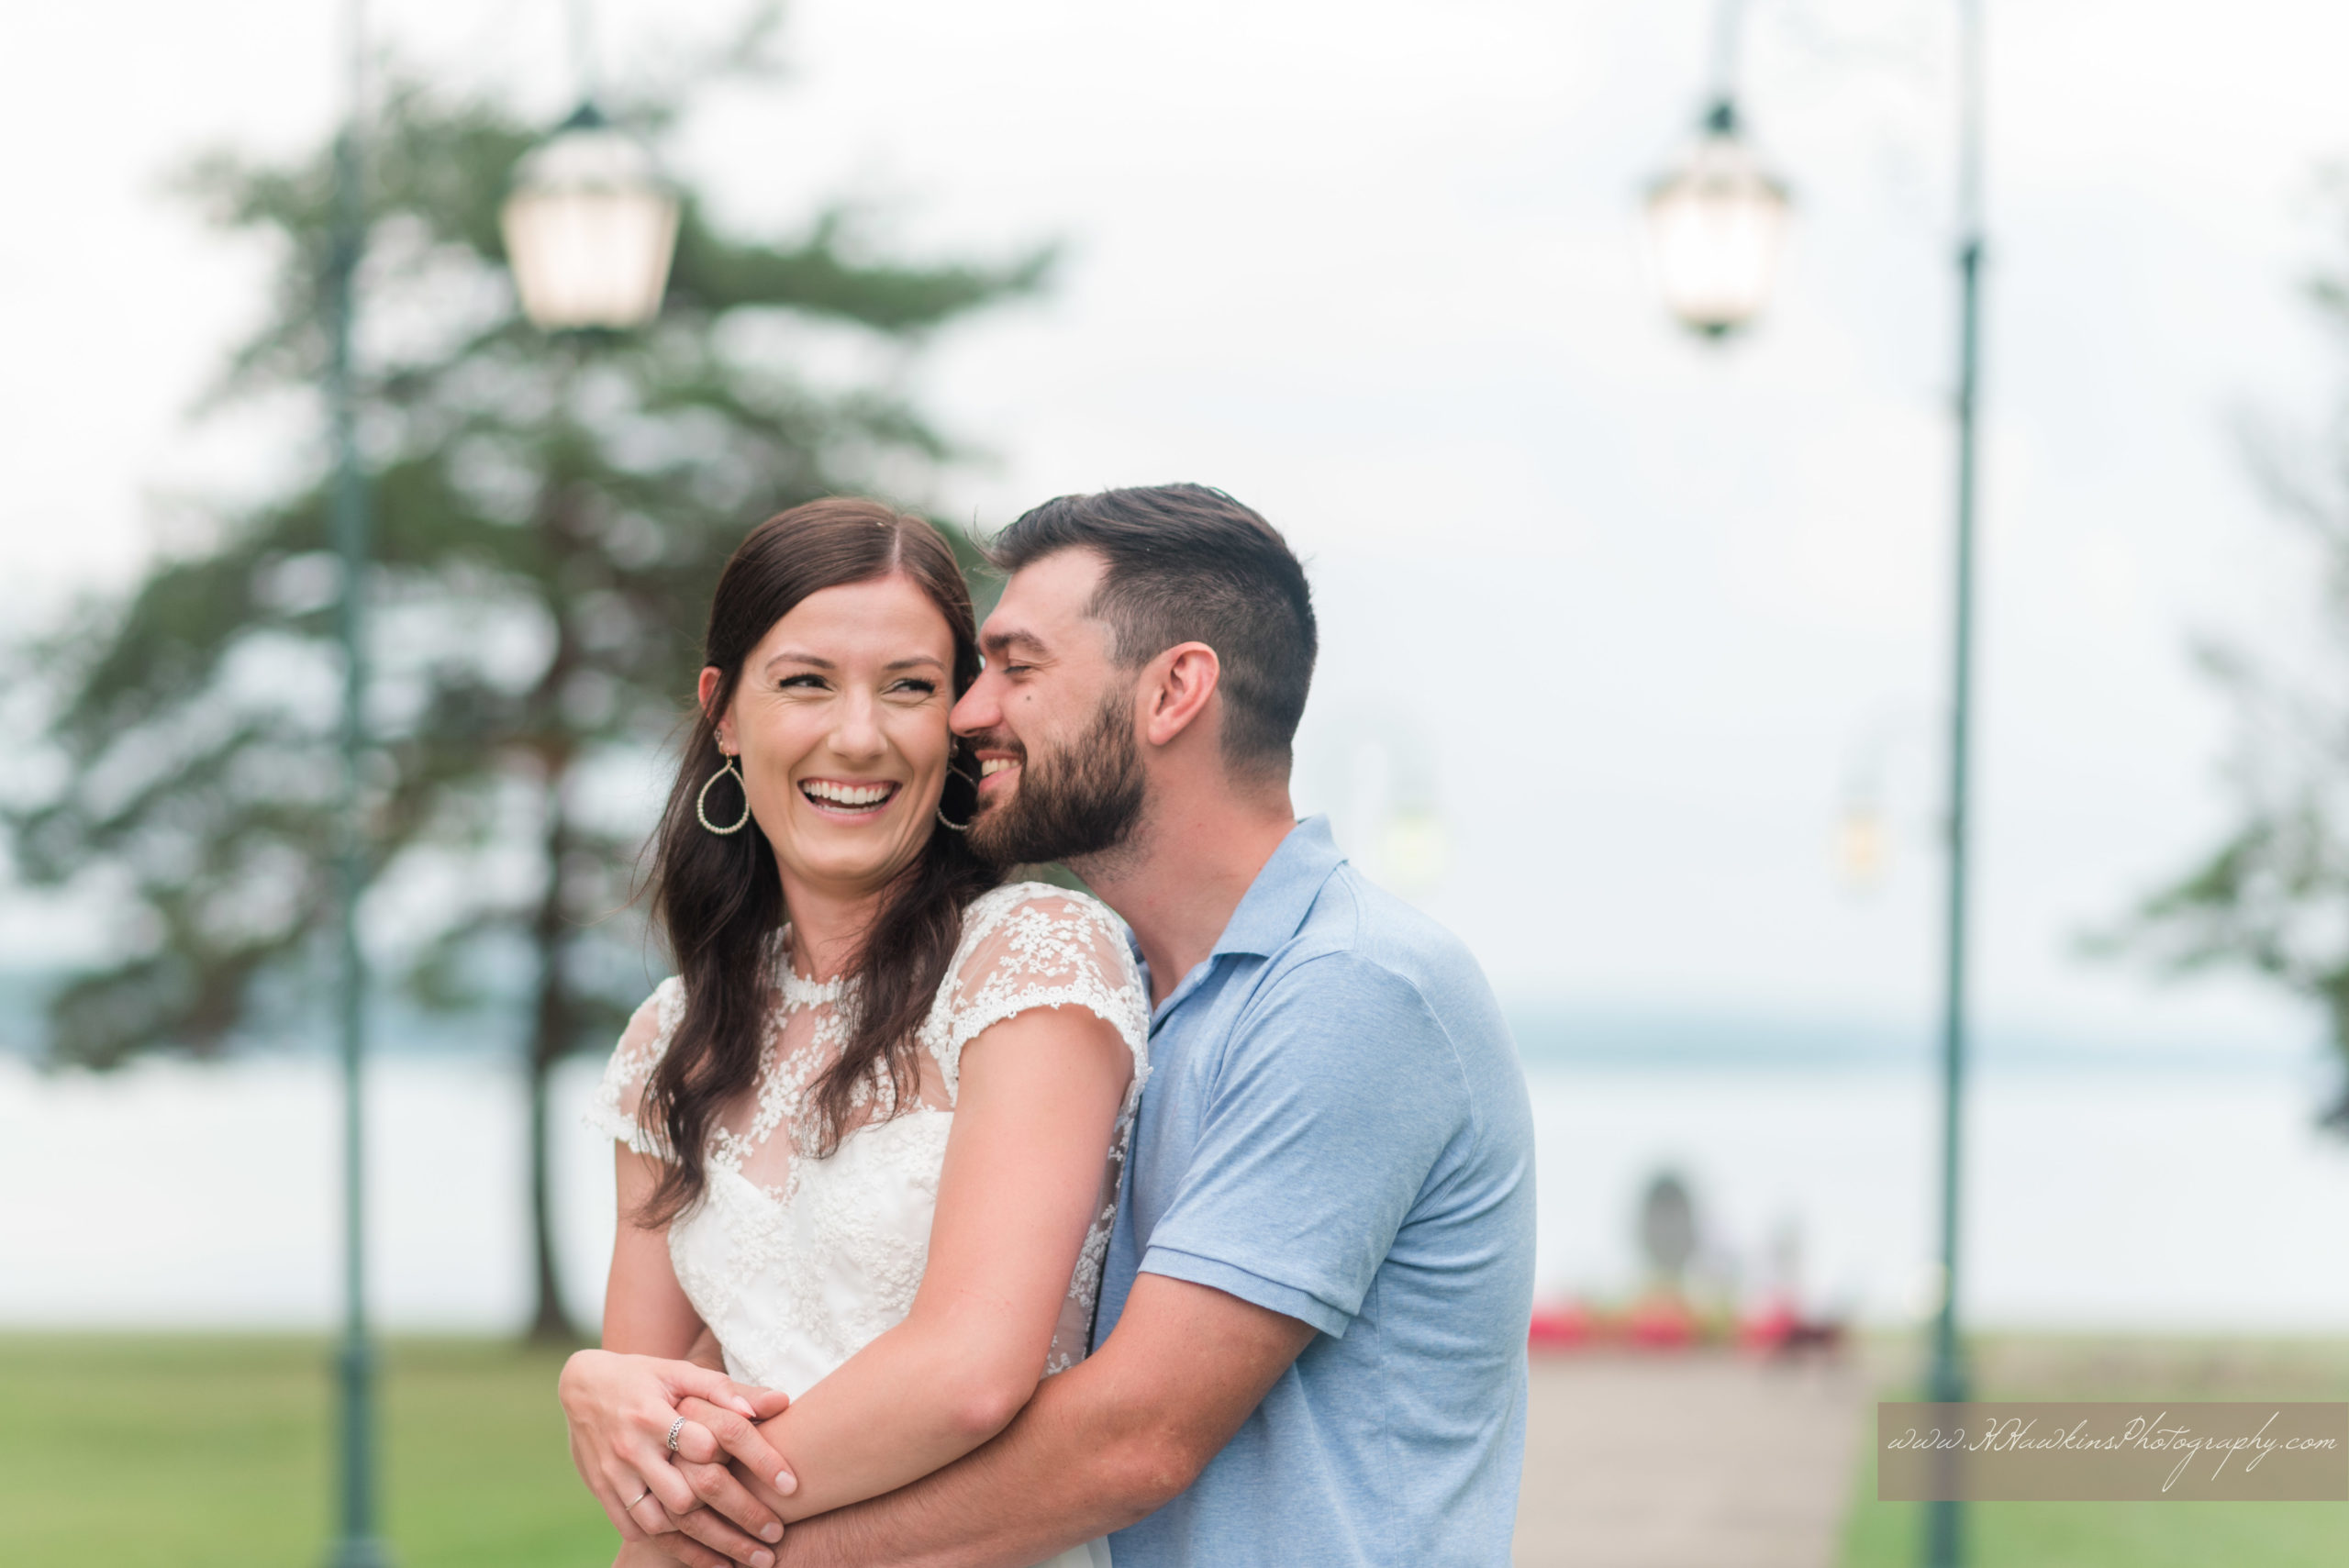 Bride and groom to be stand together on sidewalk with lake in background by Orlando engagement photographer